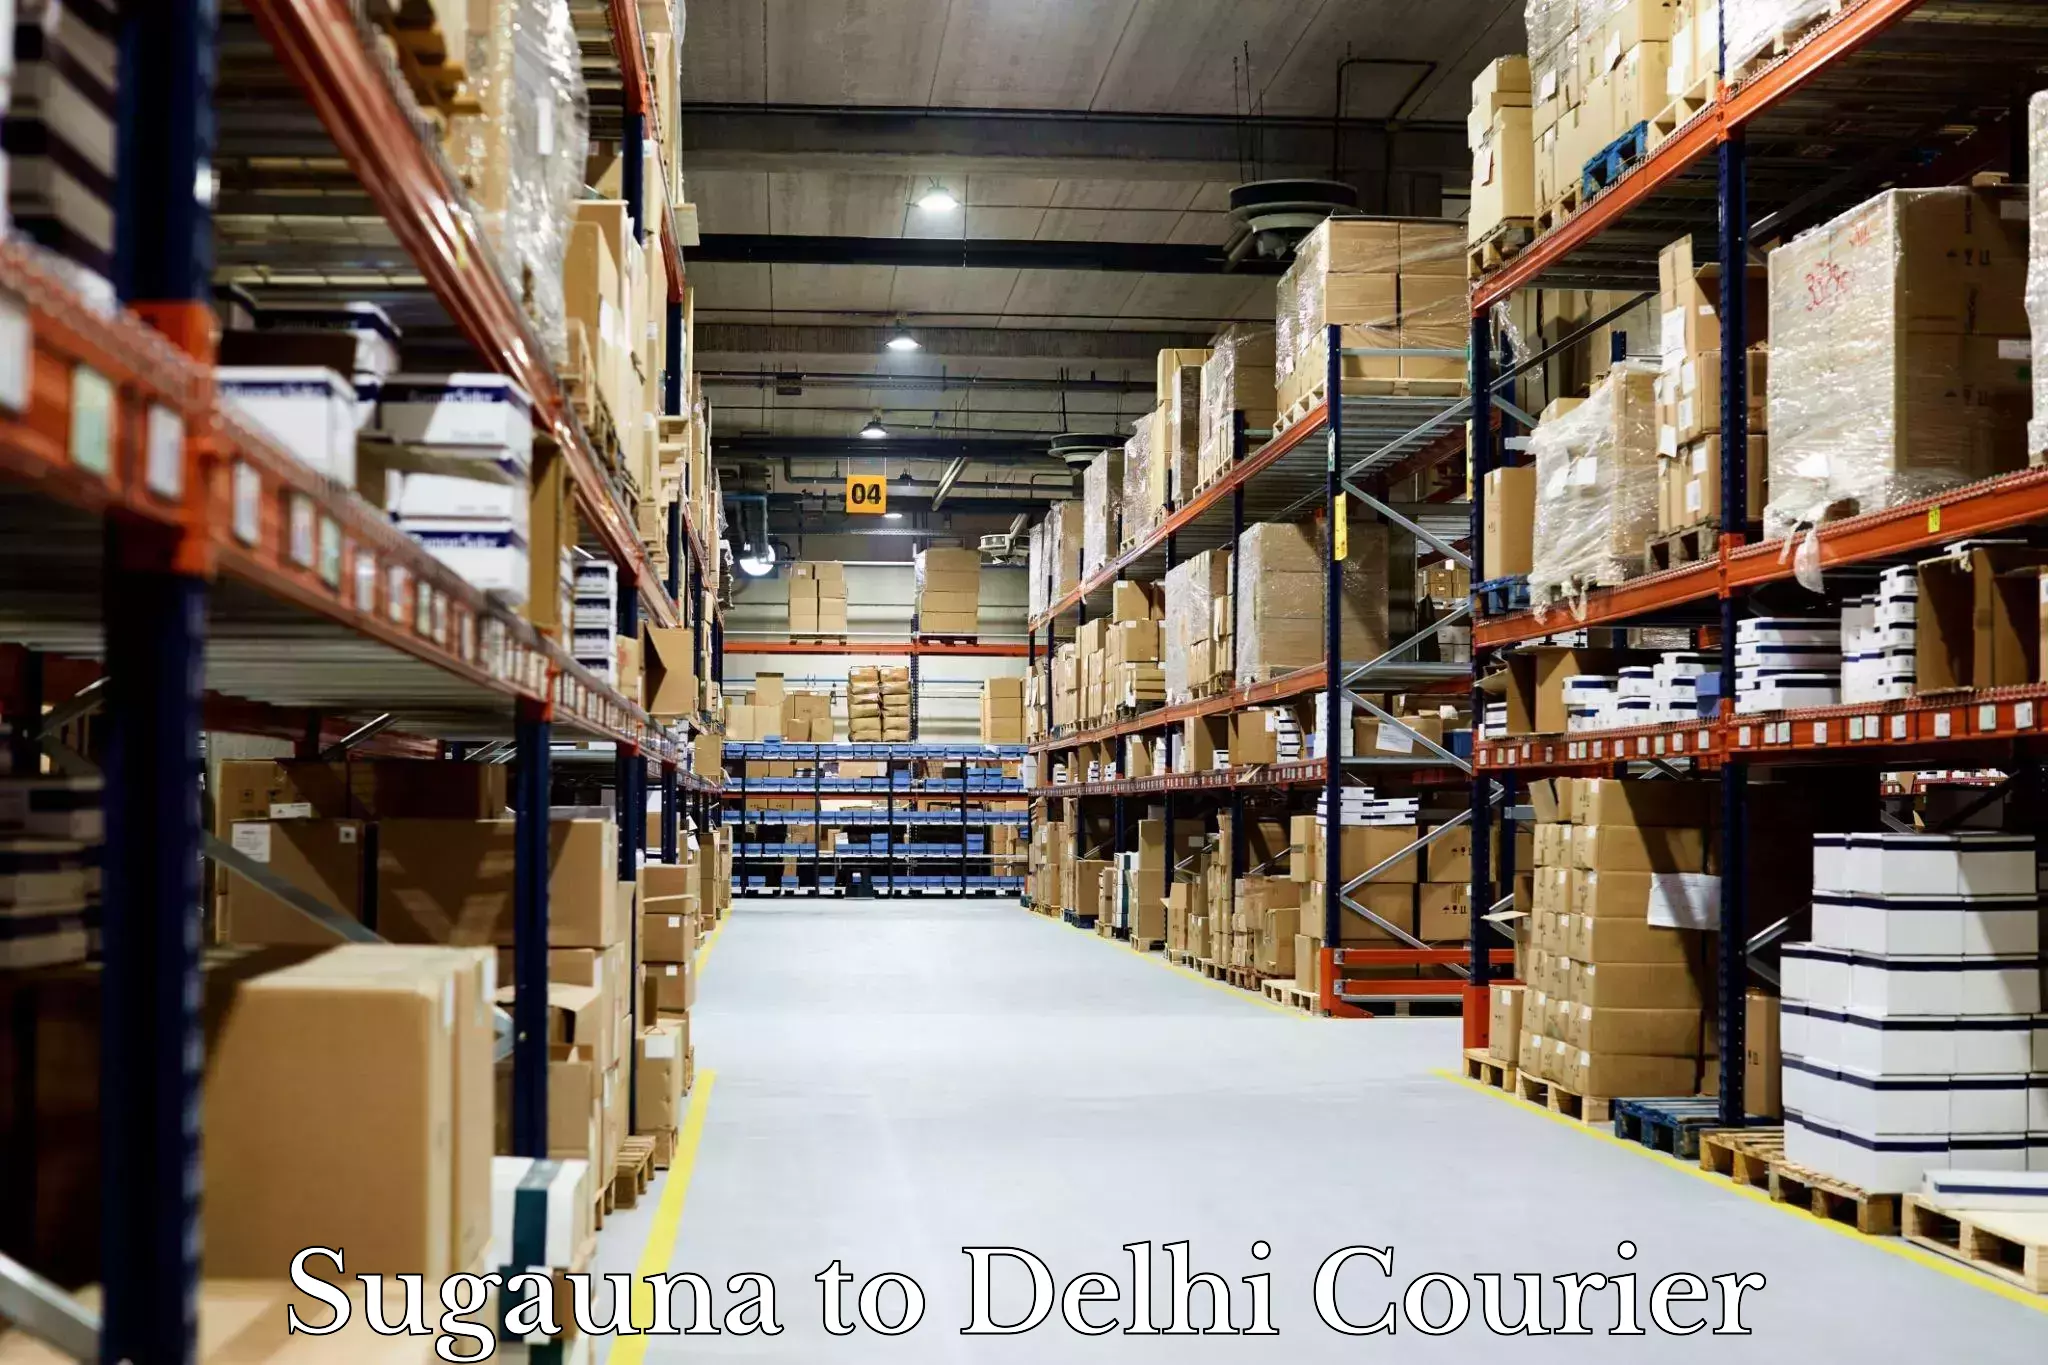 Sustainable courier practices in Sugauna to Delhi Technological University DTU